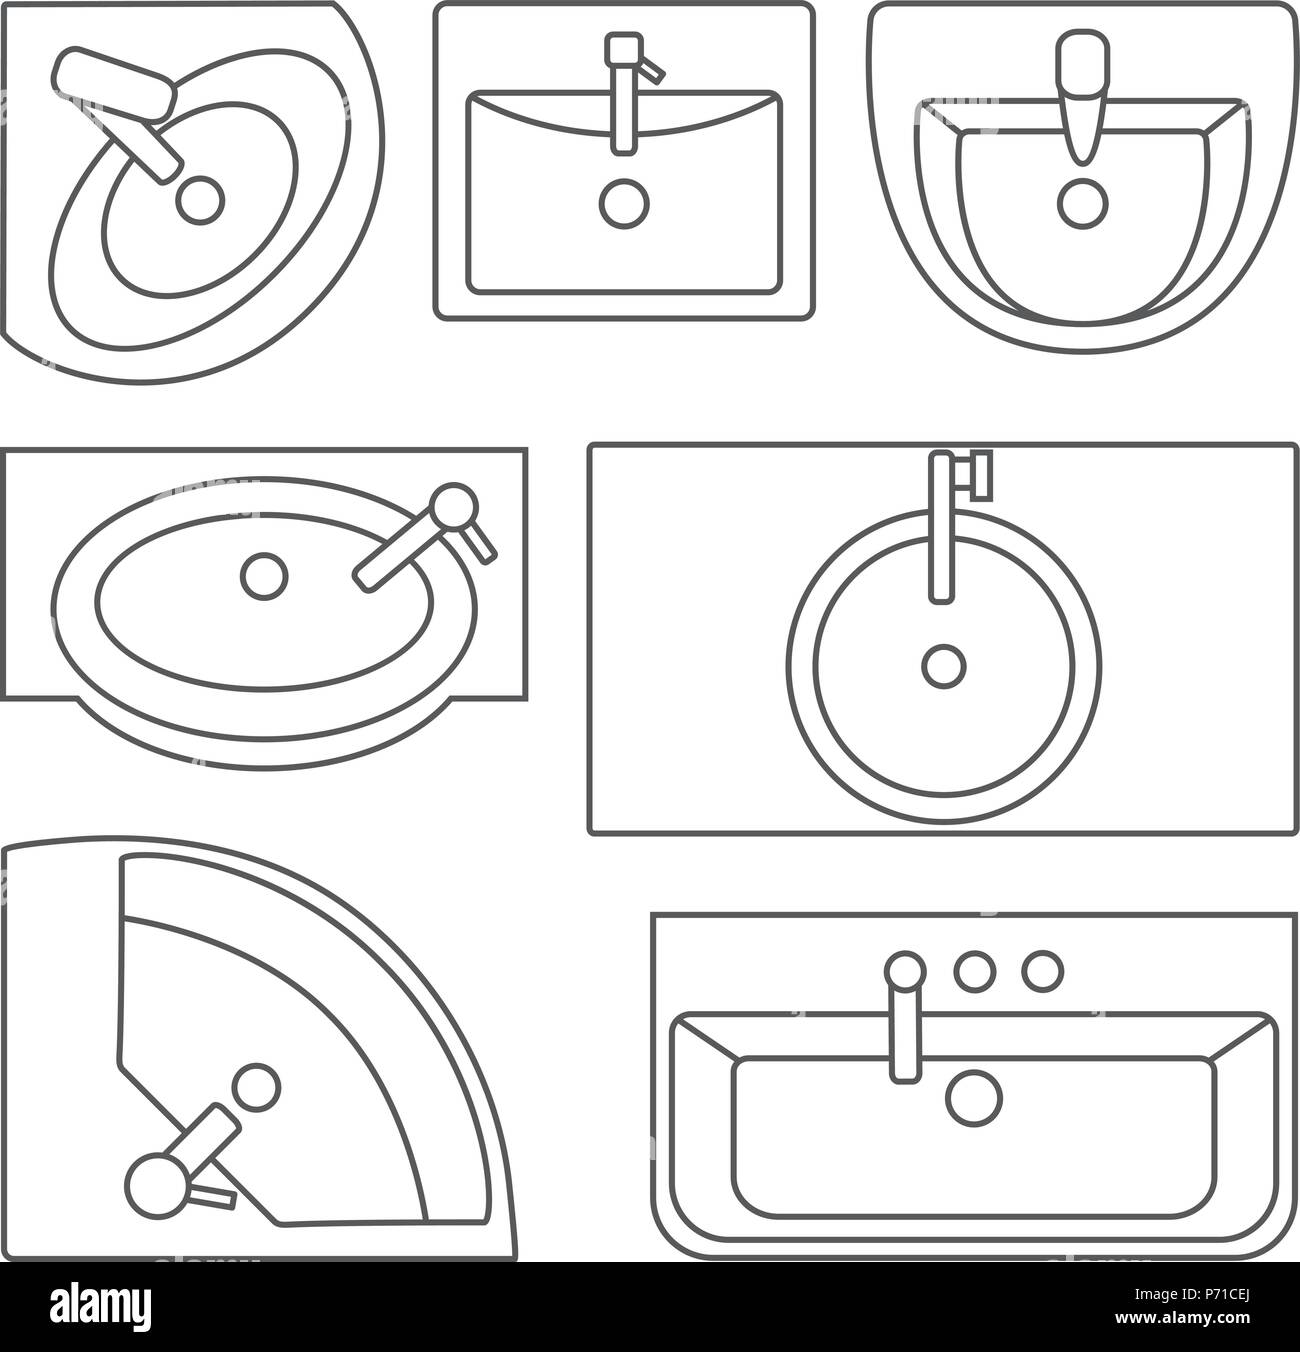 Sinks top view collection.Vector contour illustration. Set of different ...